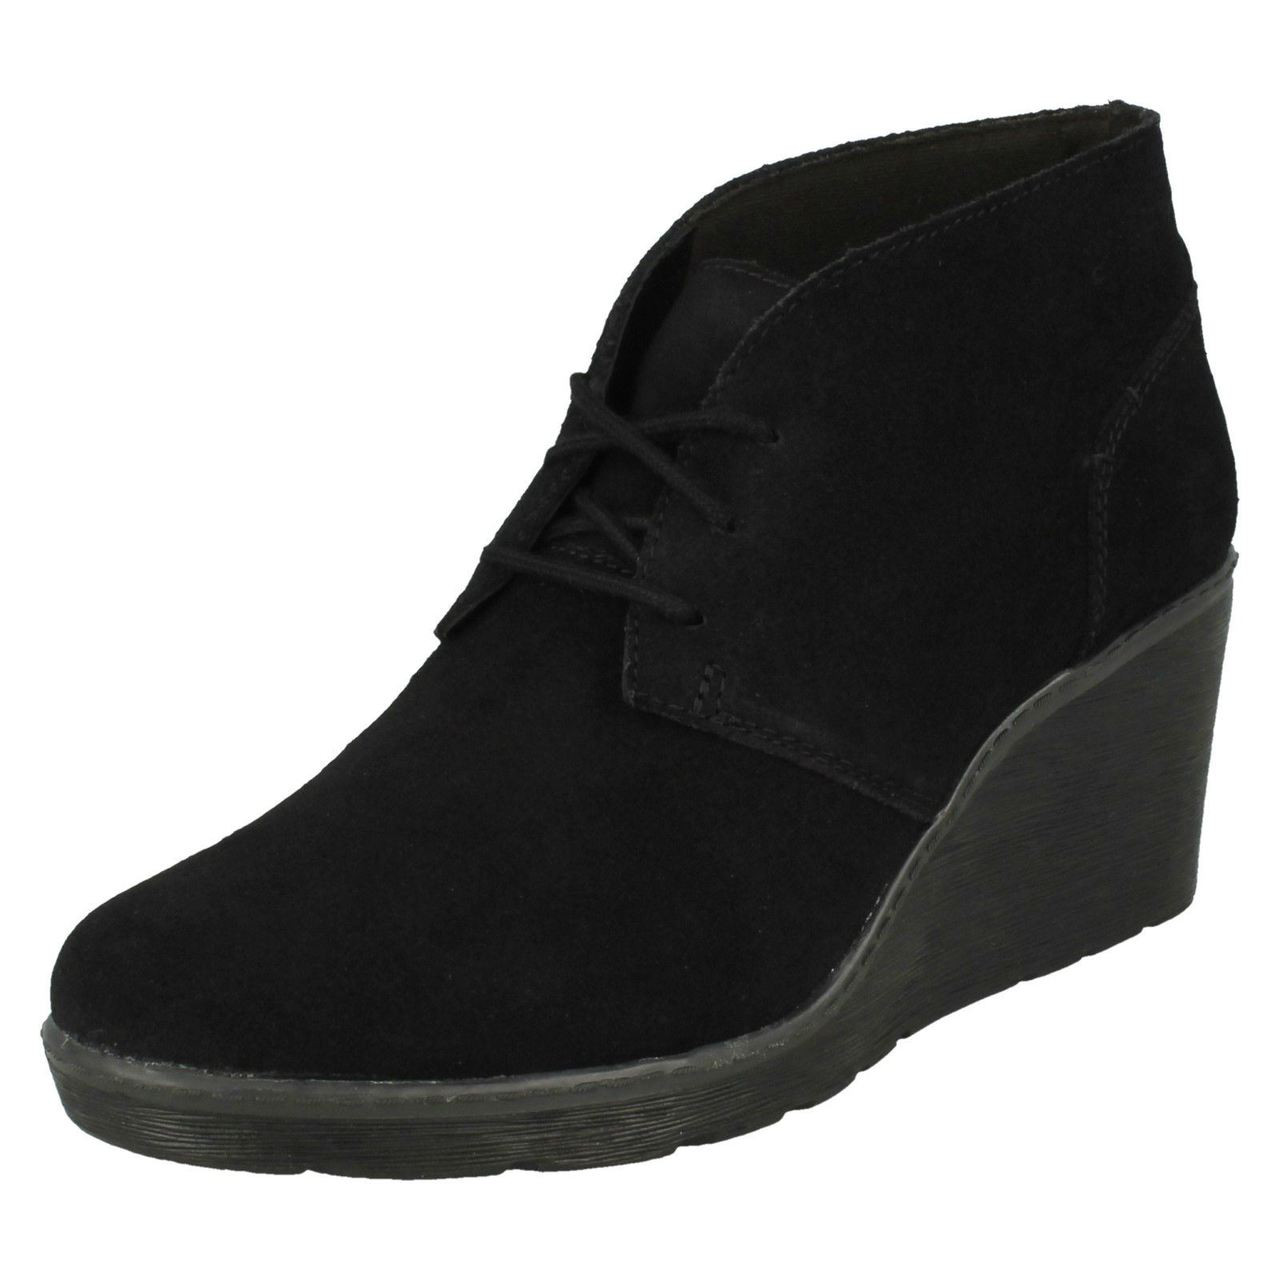 clarks ladies wedge ankle boots